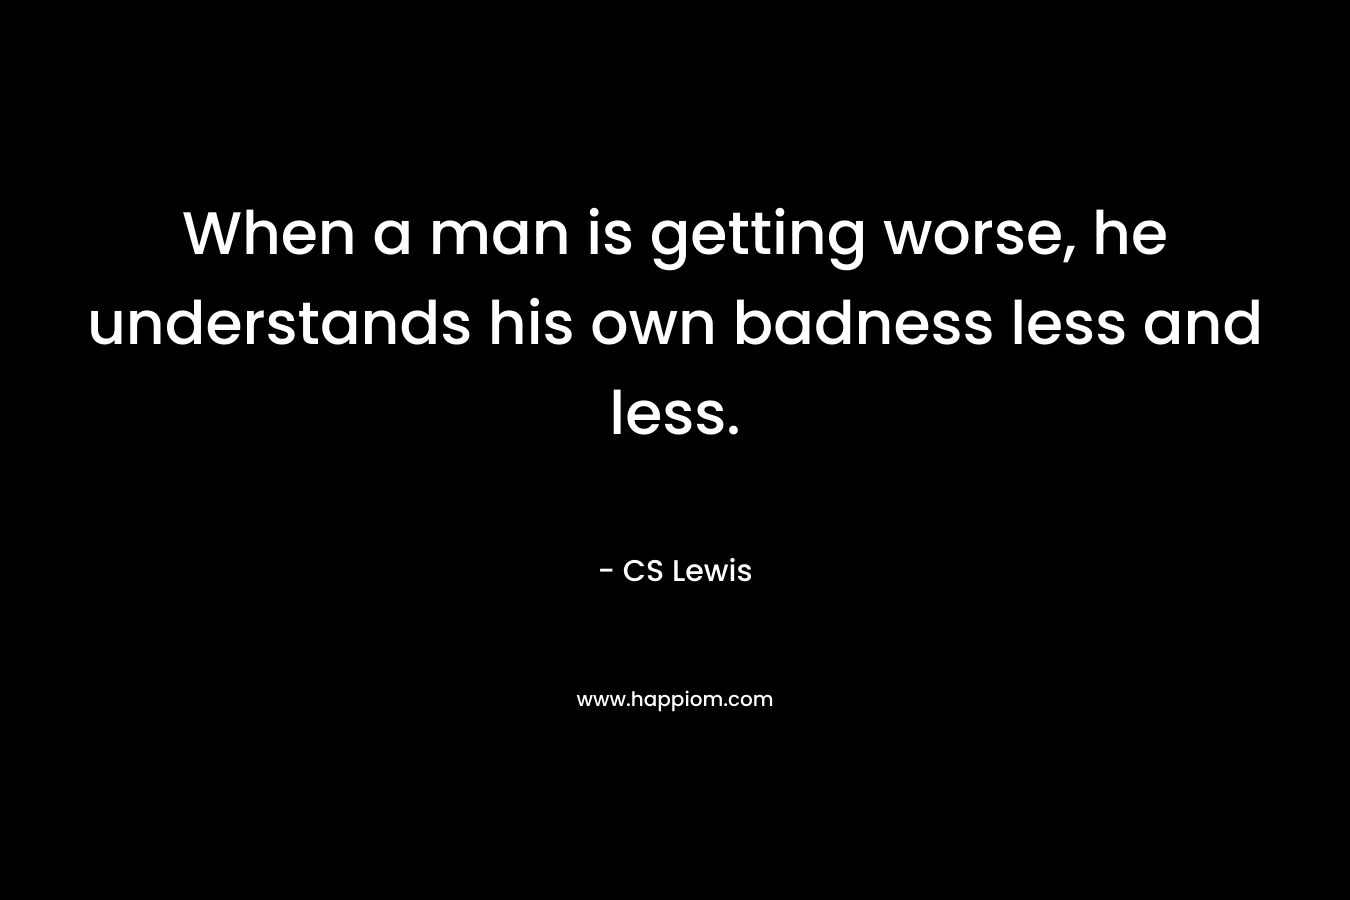 When a man is getting worse, he understands his own badness less and less.